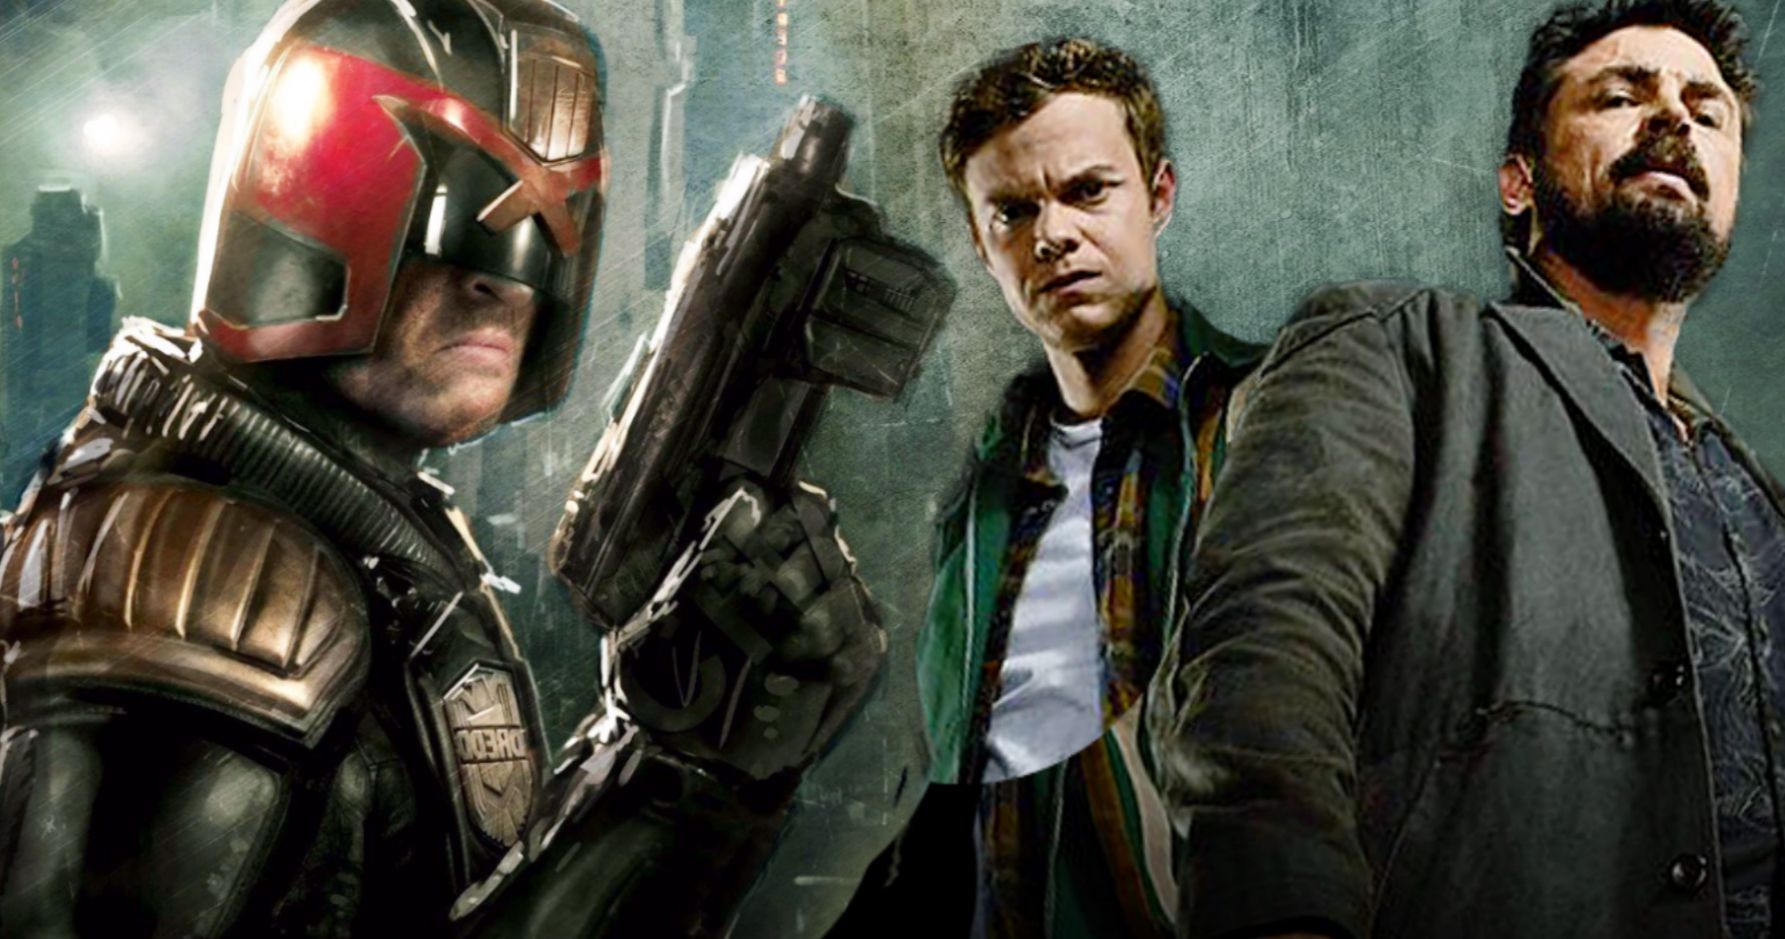 Karl Urban Imagines He May Have to Play Dredd and Billy Butcher at the Same Time